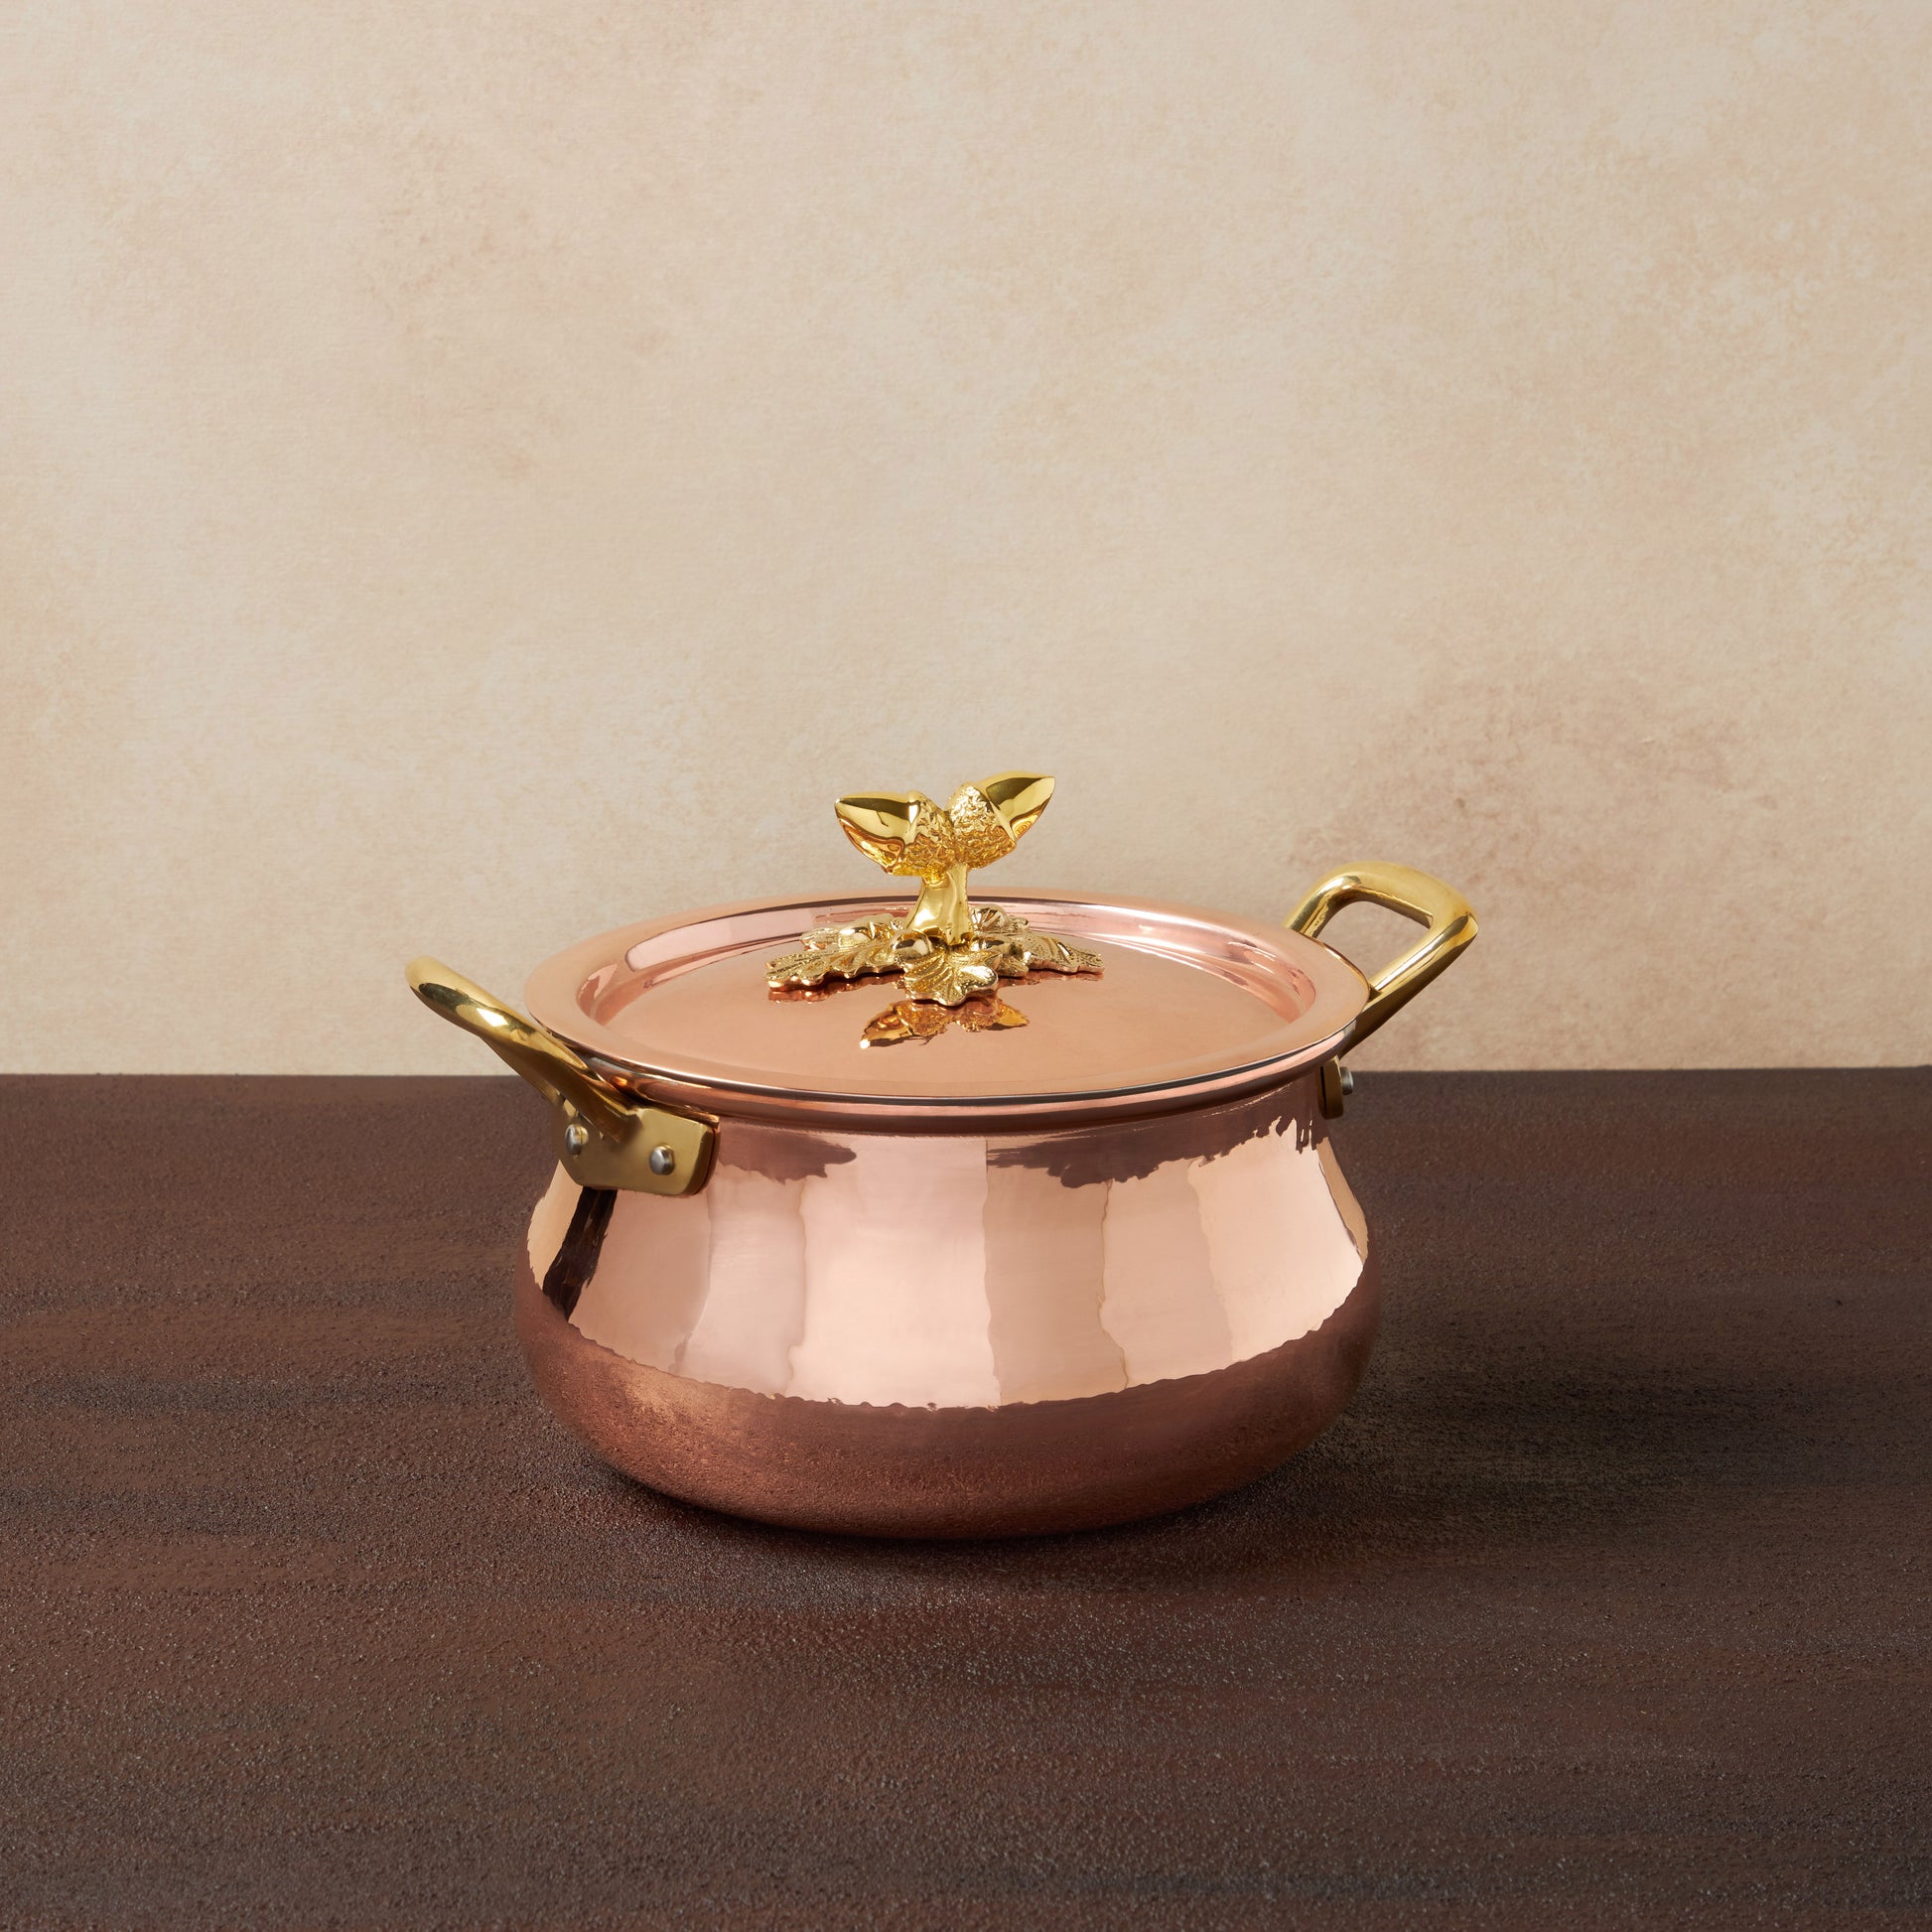 Hammered copper 3 Lt Belly Soup Pot lined with high purity tin applied by hand over fire and bronze handles, from Ruffoni Historia collection